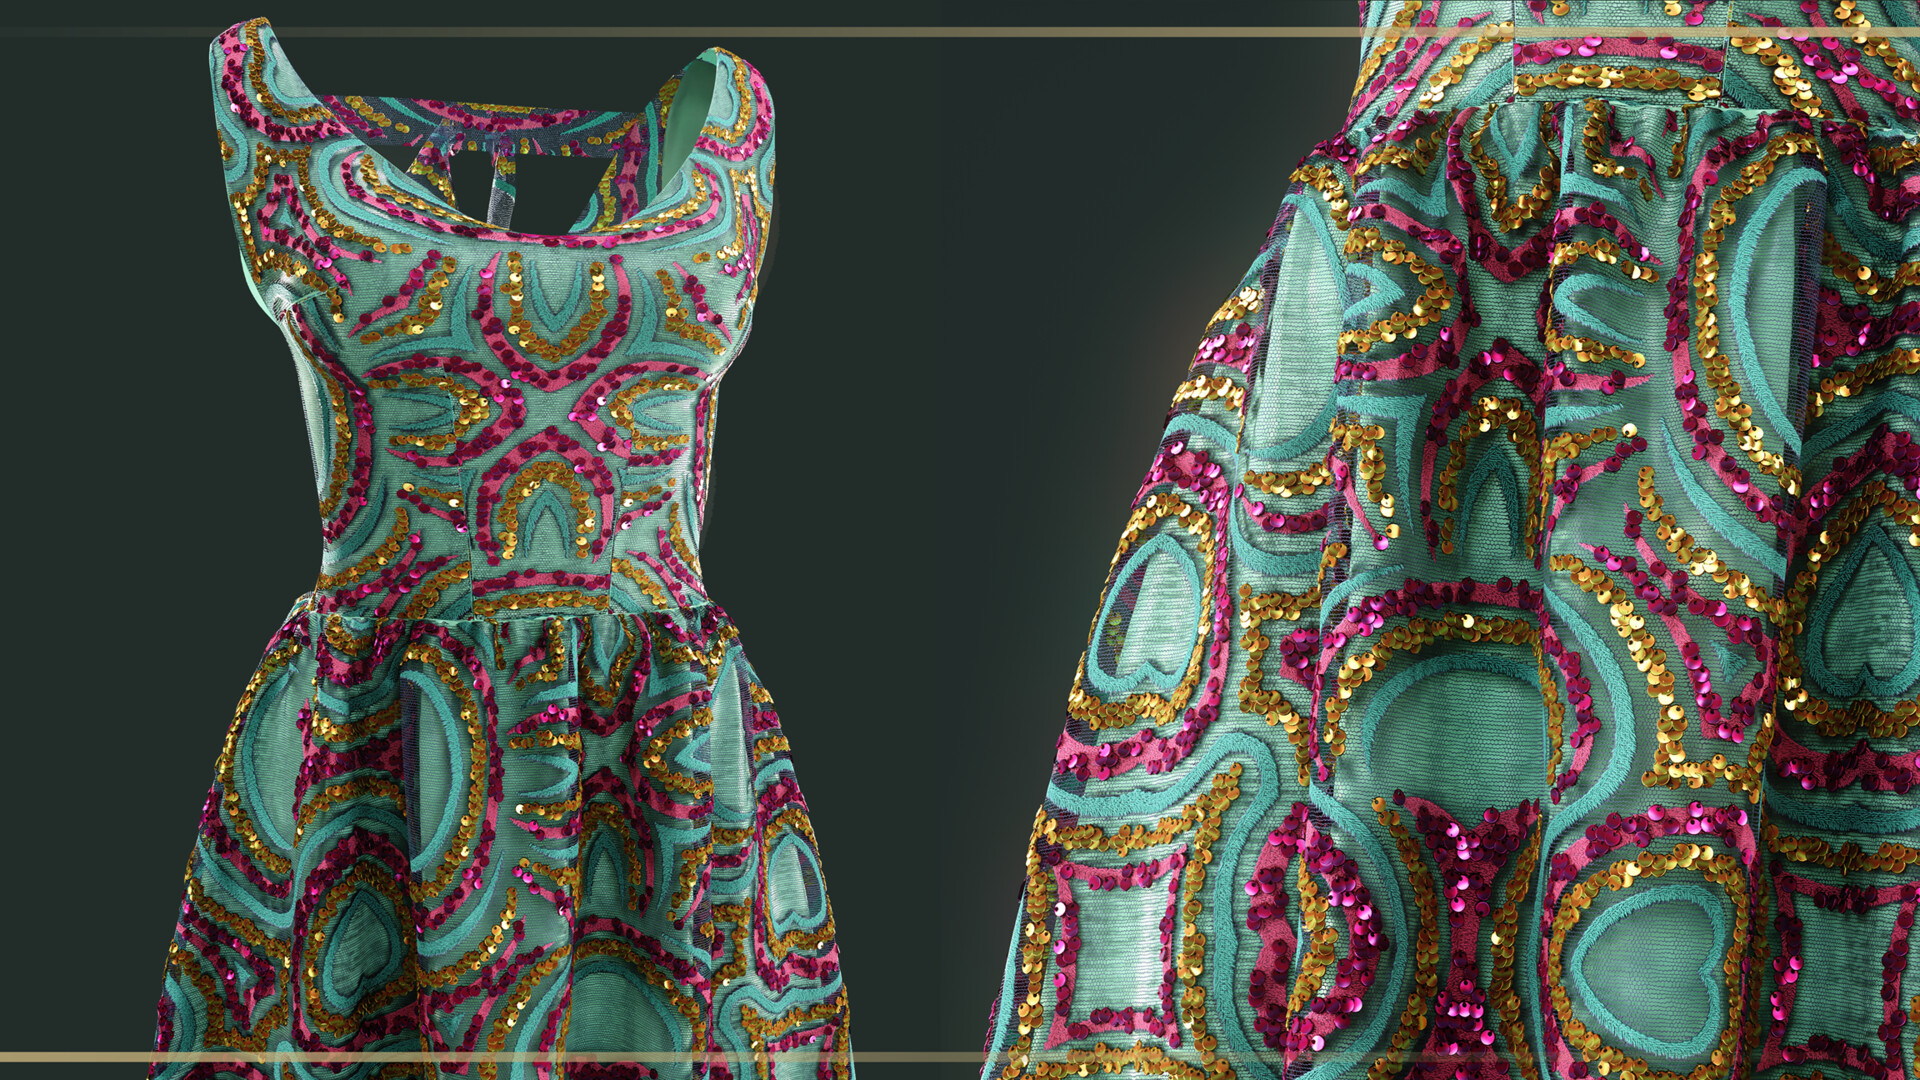 ArtStation - Sequin Lace Material